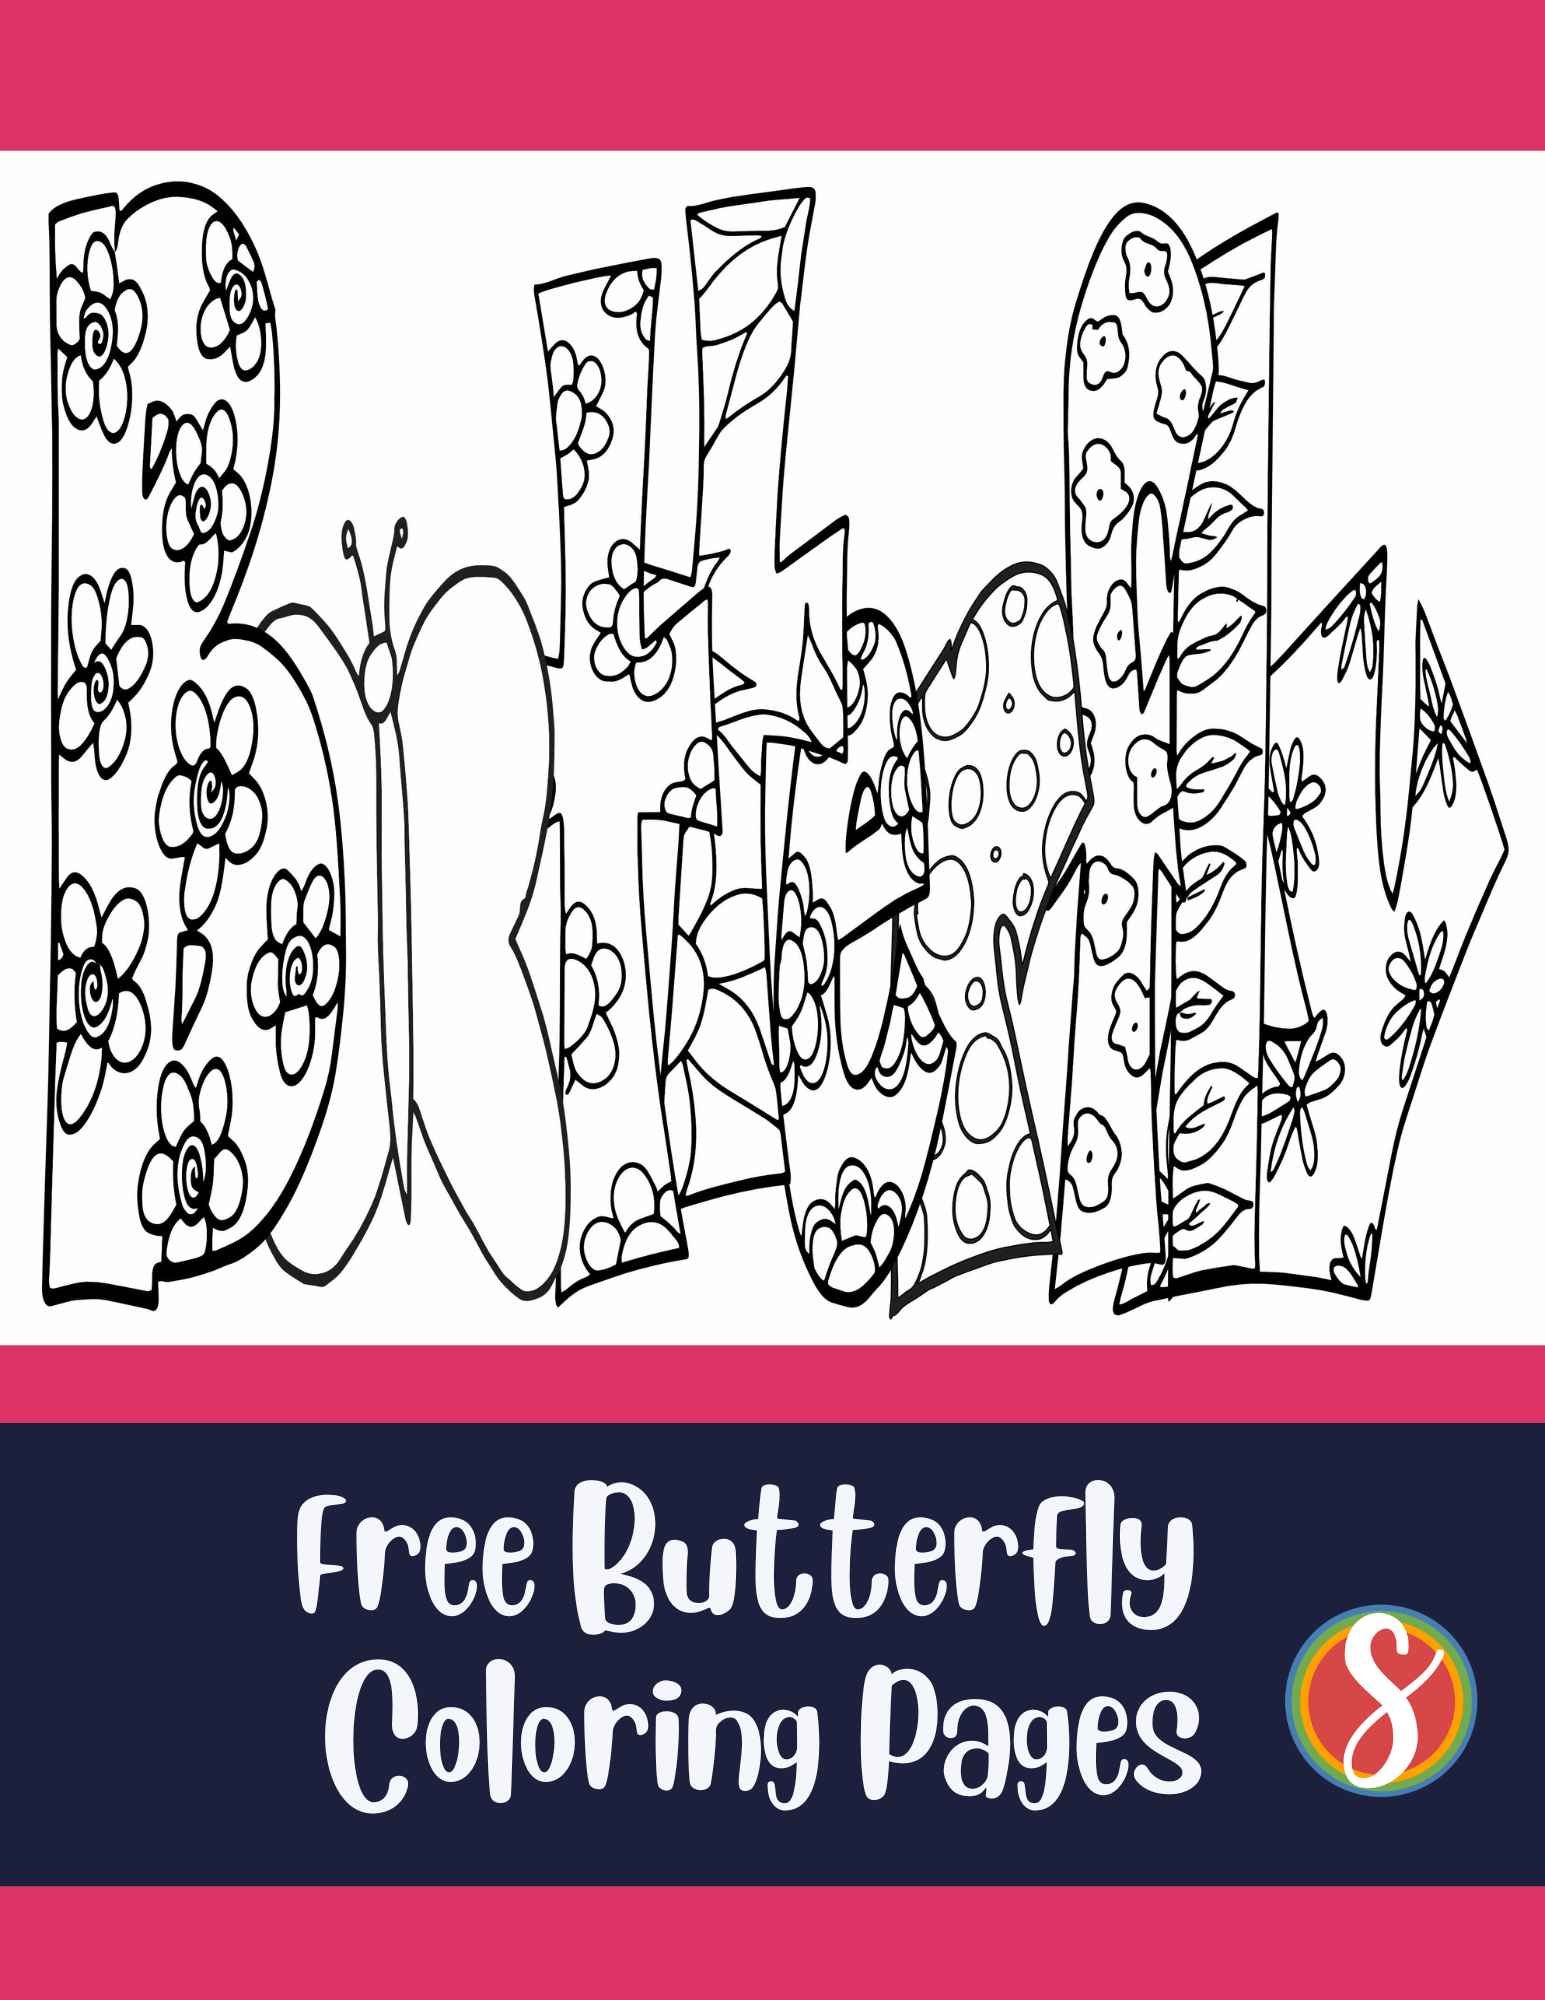 bubble letters "Butterfly" with flower doodle inside each letter to color